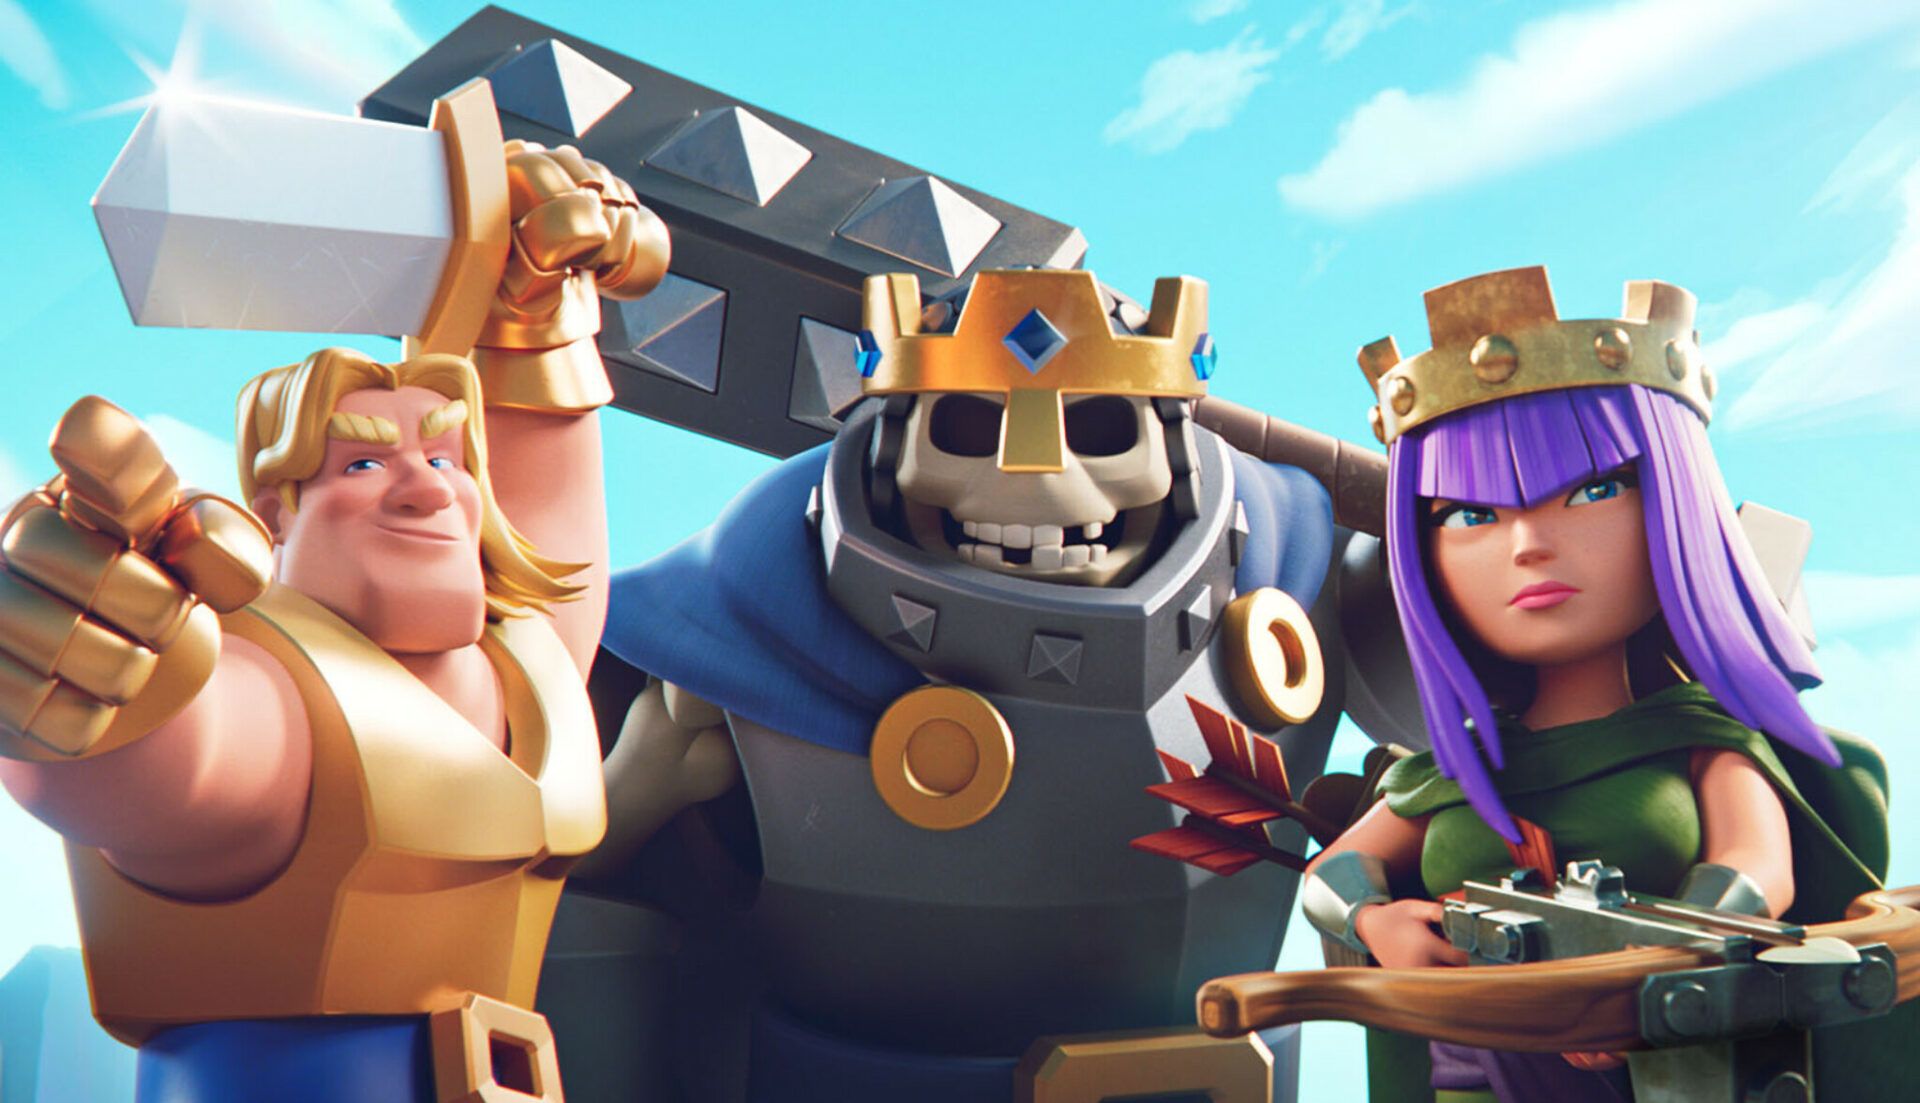 Clash Royale is going down for maintenance today